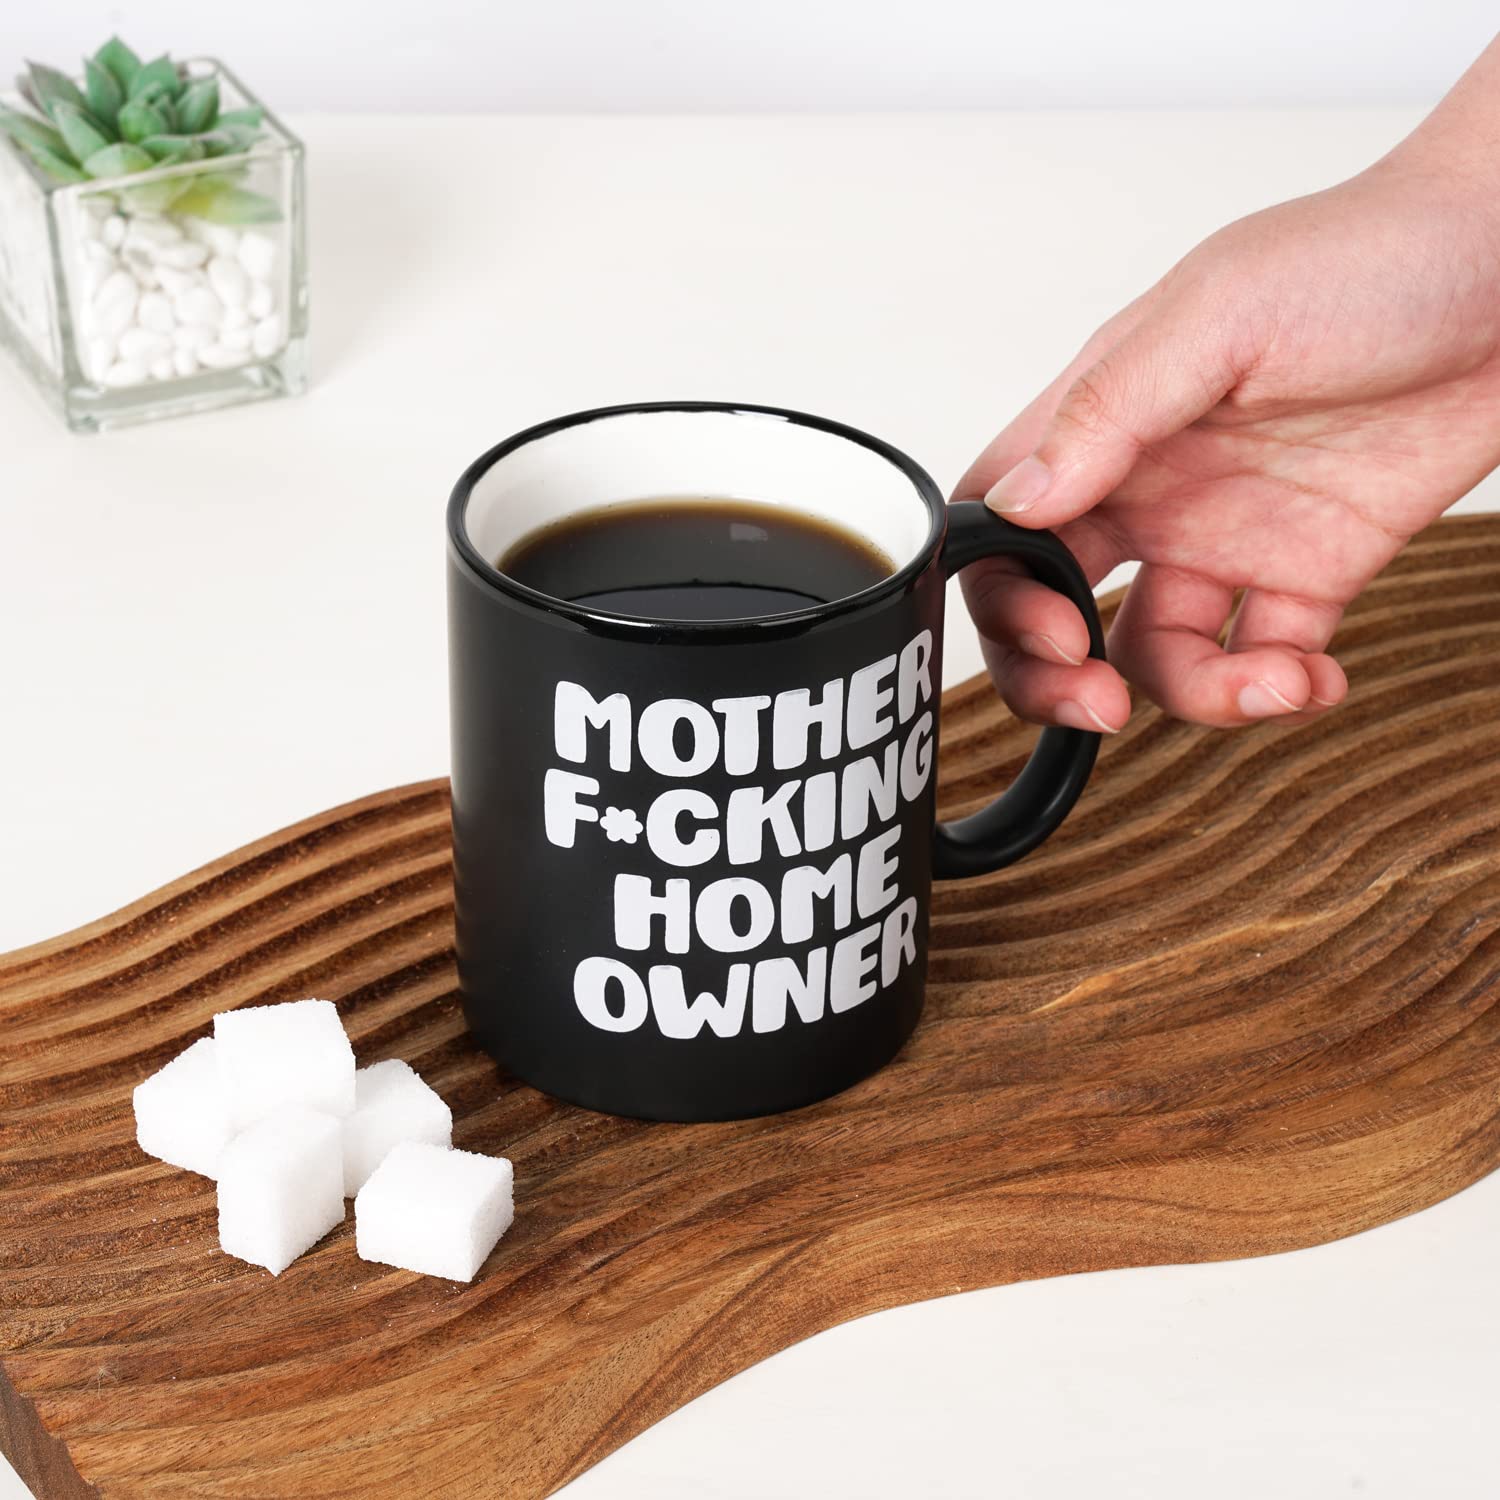 Housewarming Gifts for Men, Women - First Home House Gifts For New Home Owner - Funny First Time House Warming Gift Ideas - Mother Effing Homeowner - Matte Black Mug, 11.5oz Coffee Cup